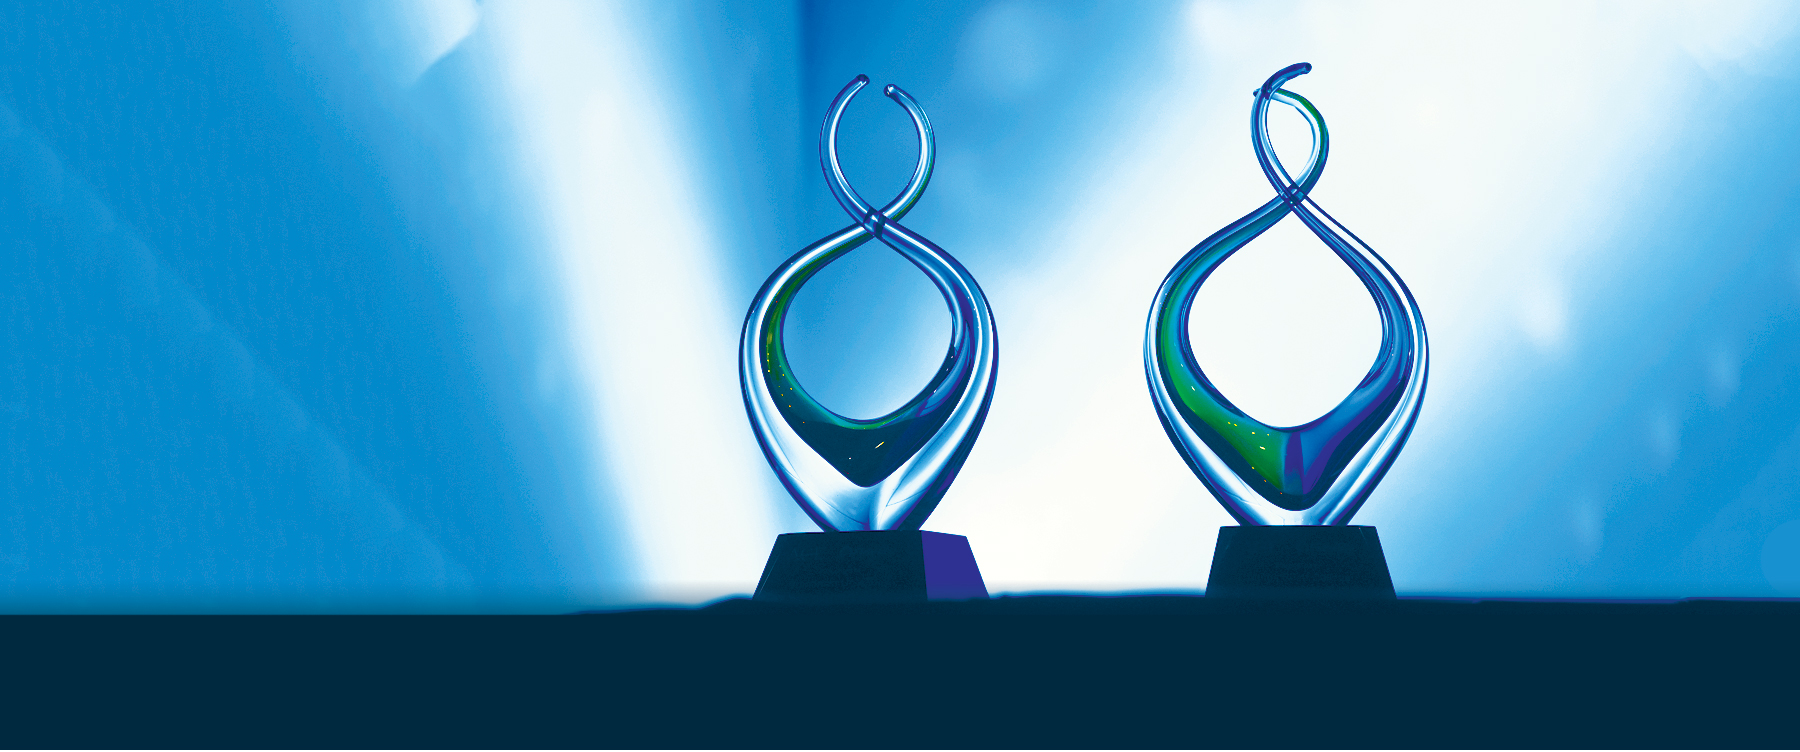 There's Still Time to Nominate or Apply for an ACE Leadership Award